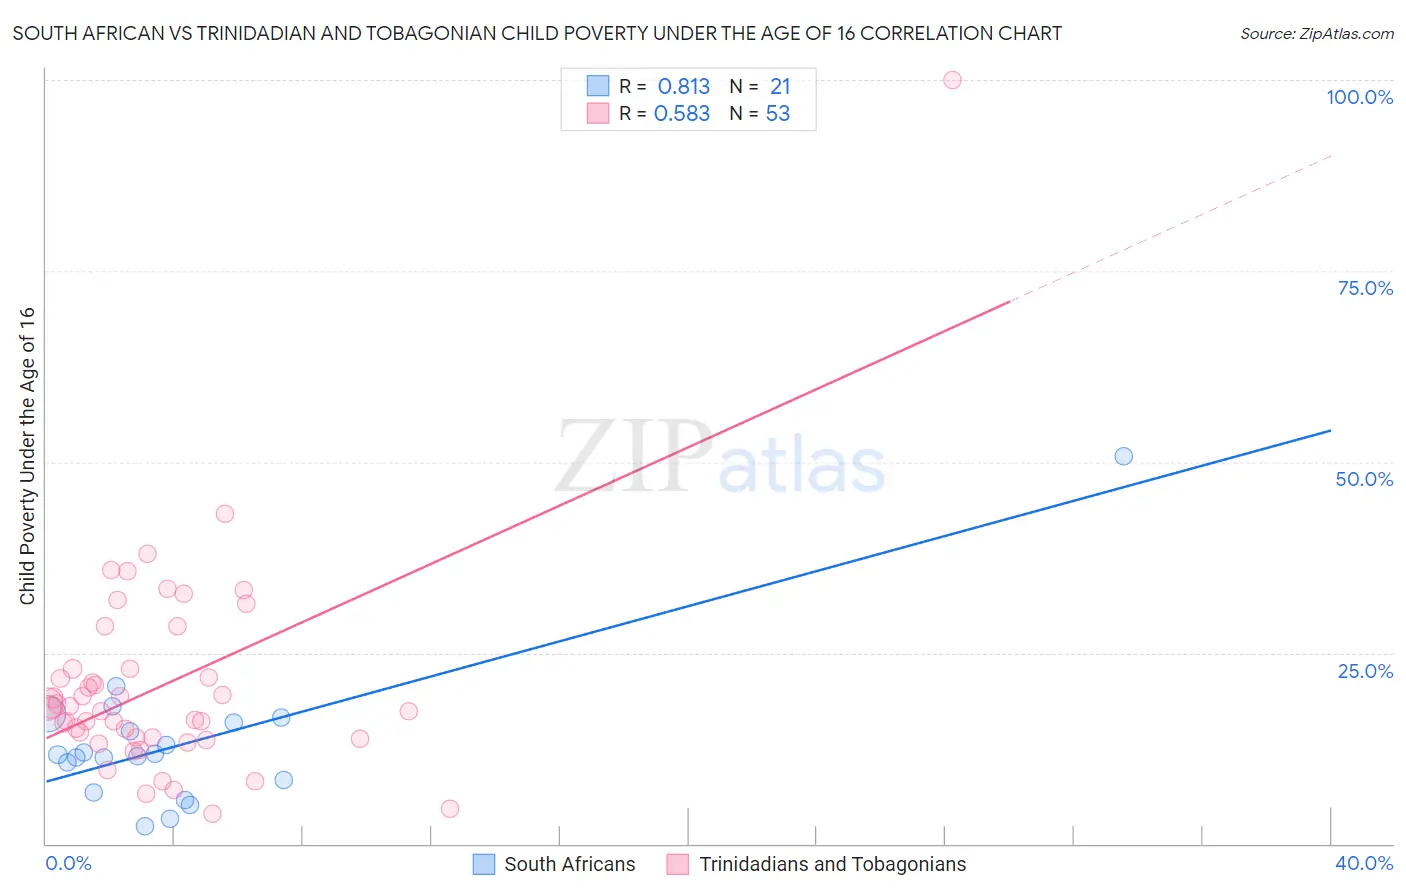 South African vs Trinidadian and Tobagonian Child Poverty Under the Age of 16